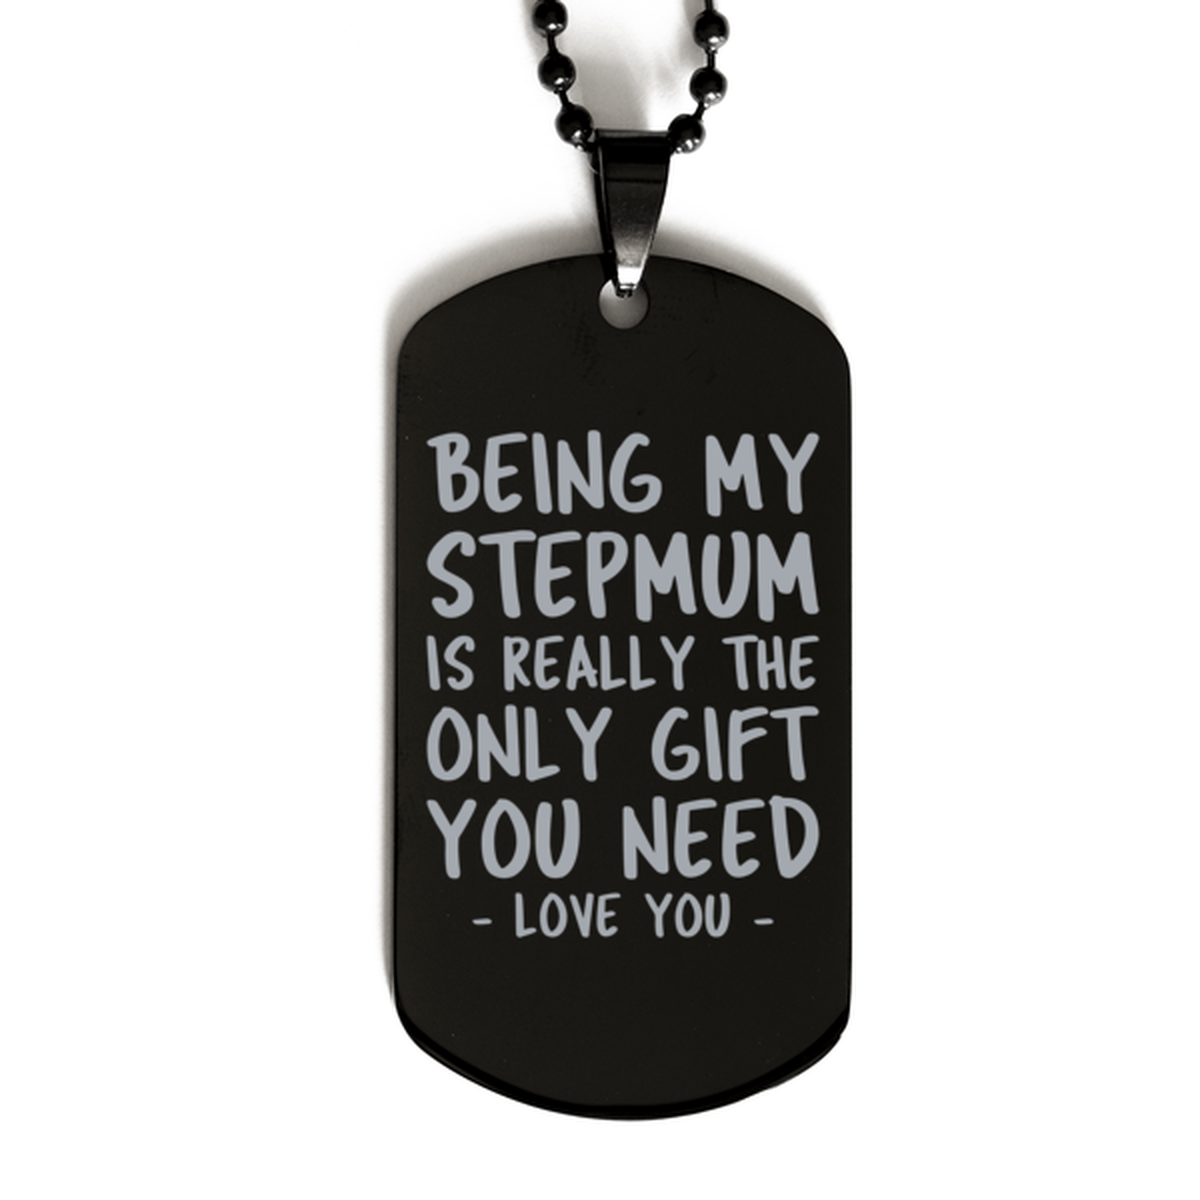 Funny Stepmum Black Dog Tag Necklace, Being My Stepmum Is Really the Only Gift You Need, Best Birthday Gifts for Stepmum